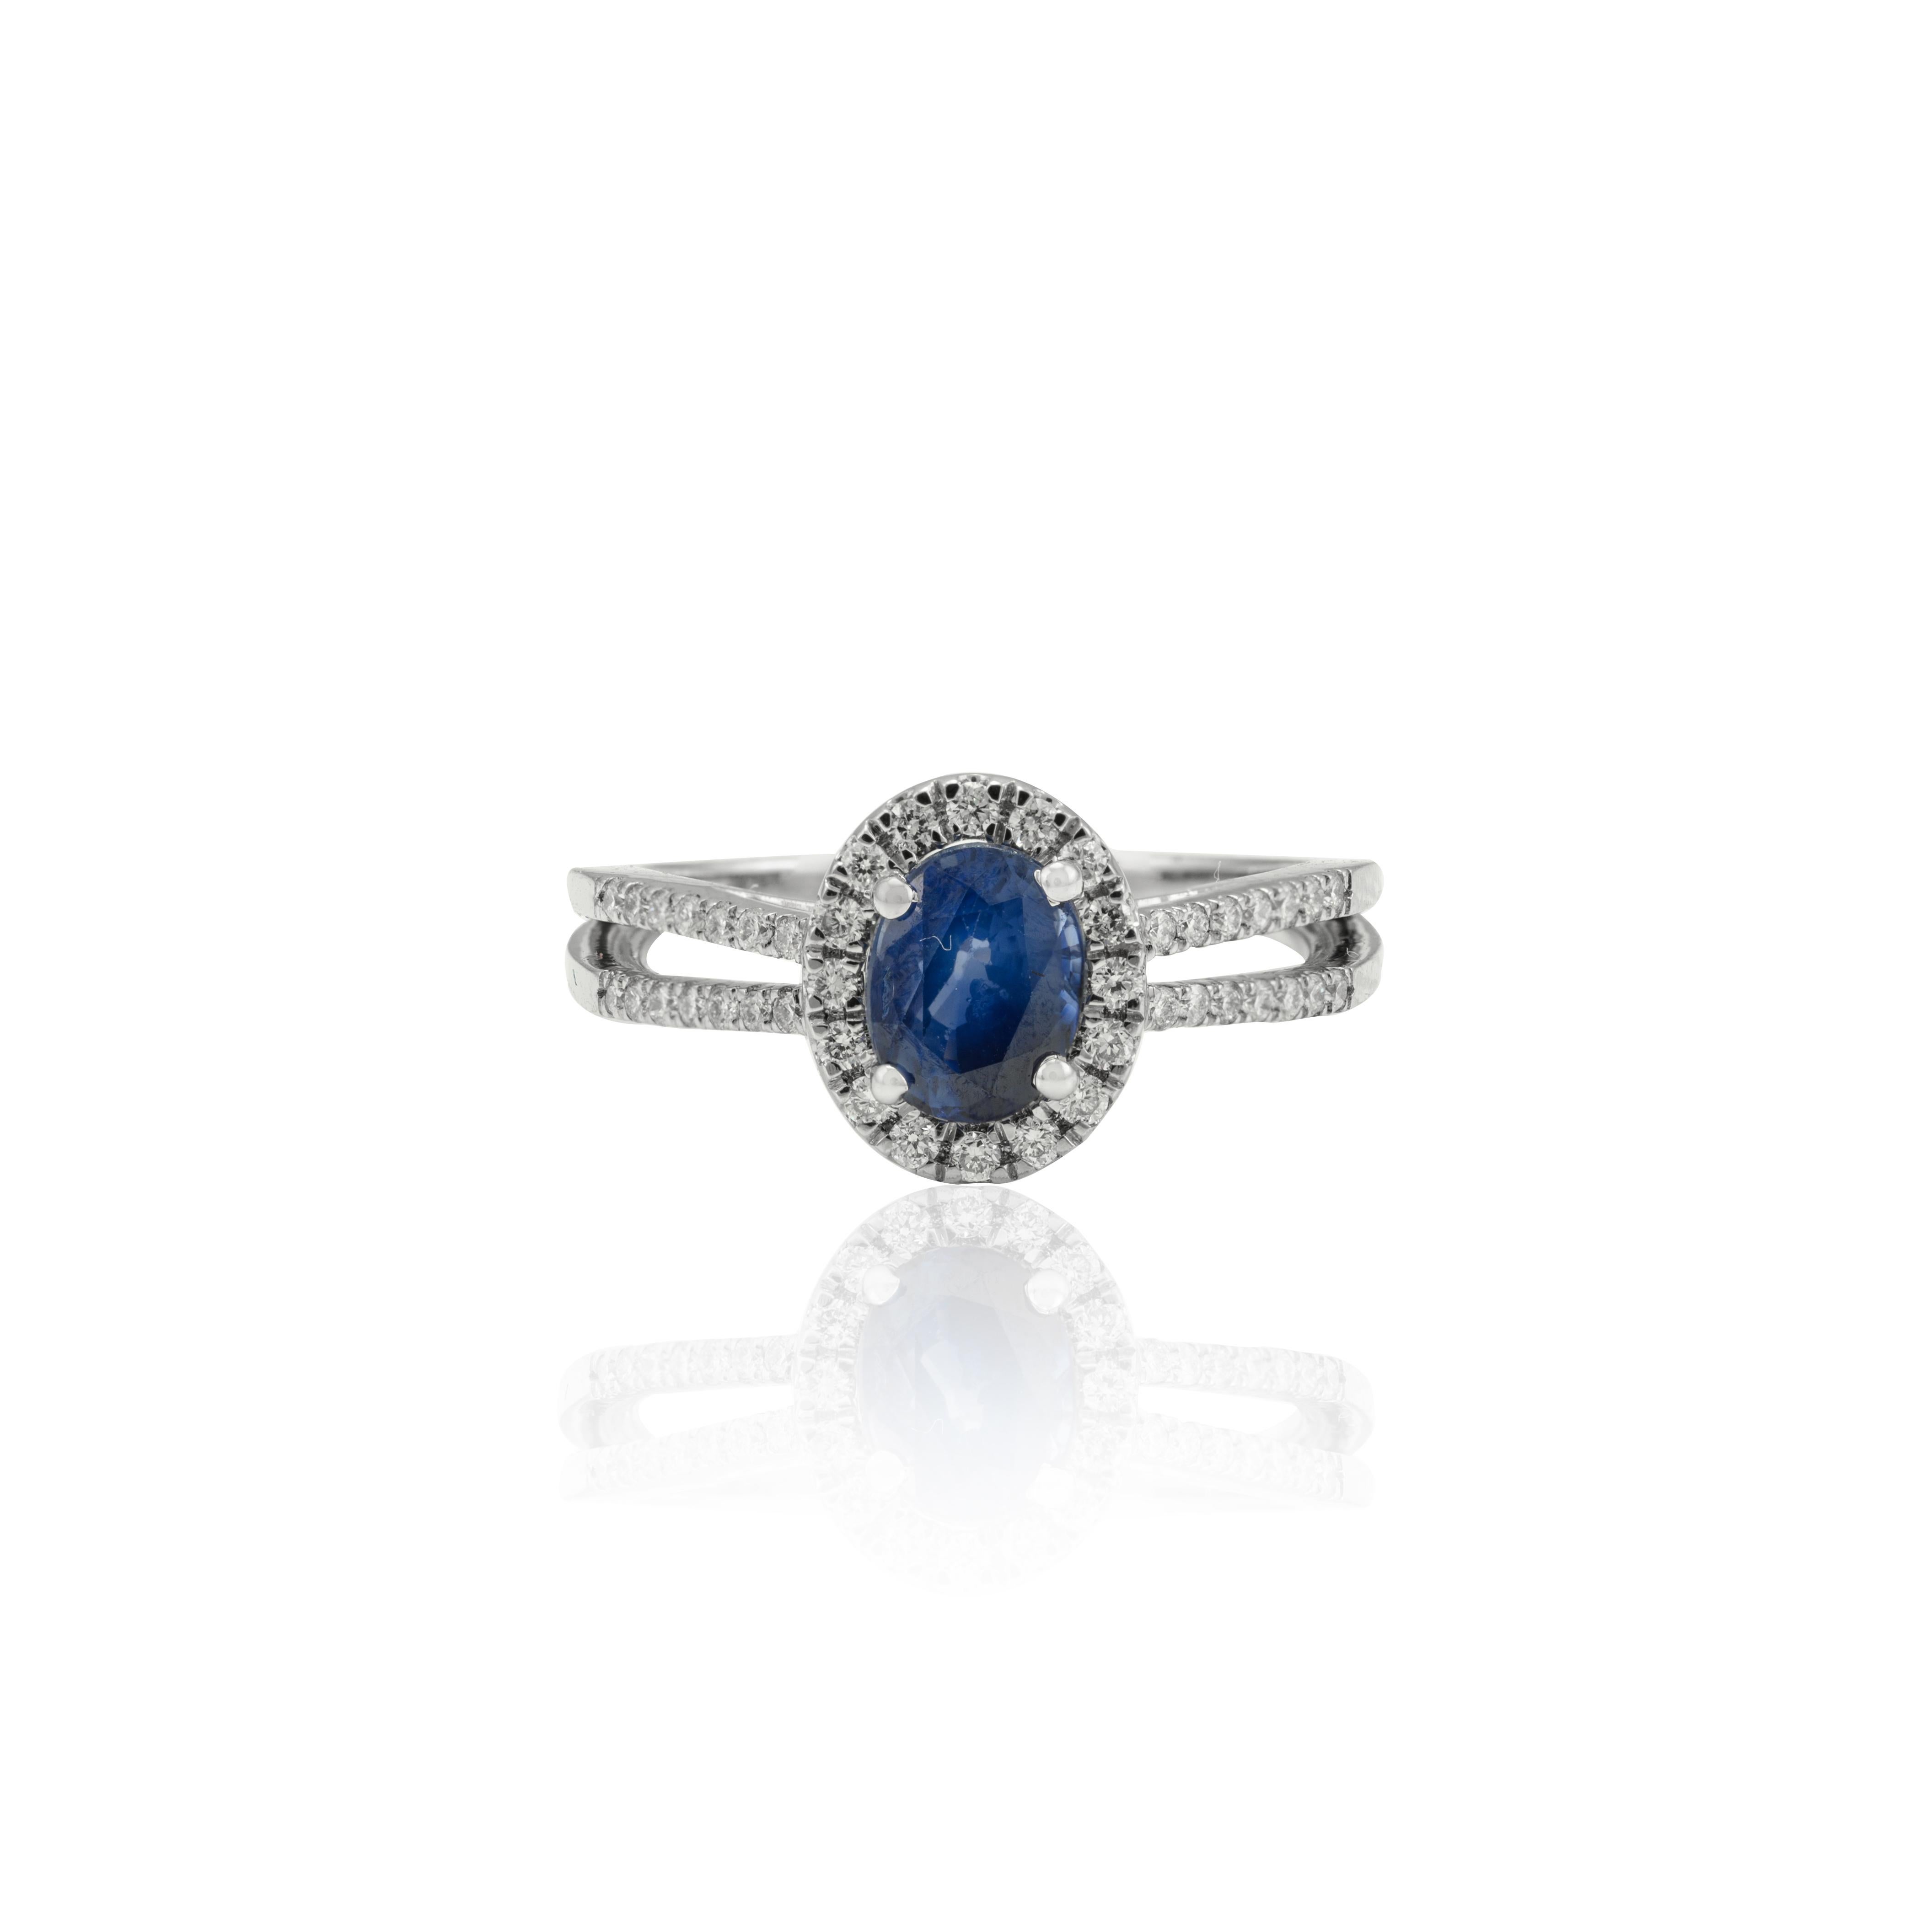 For Sale:  18k Solid White Gold Certified Blue Sapphire and Diamond Engagement Ring 5